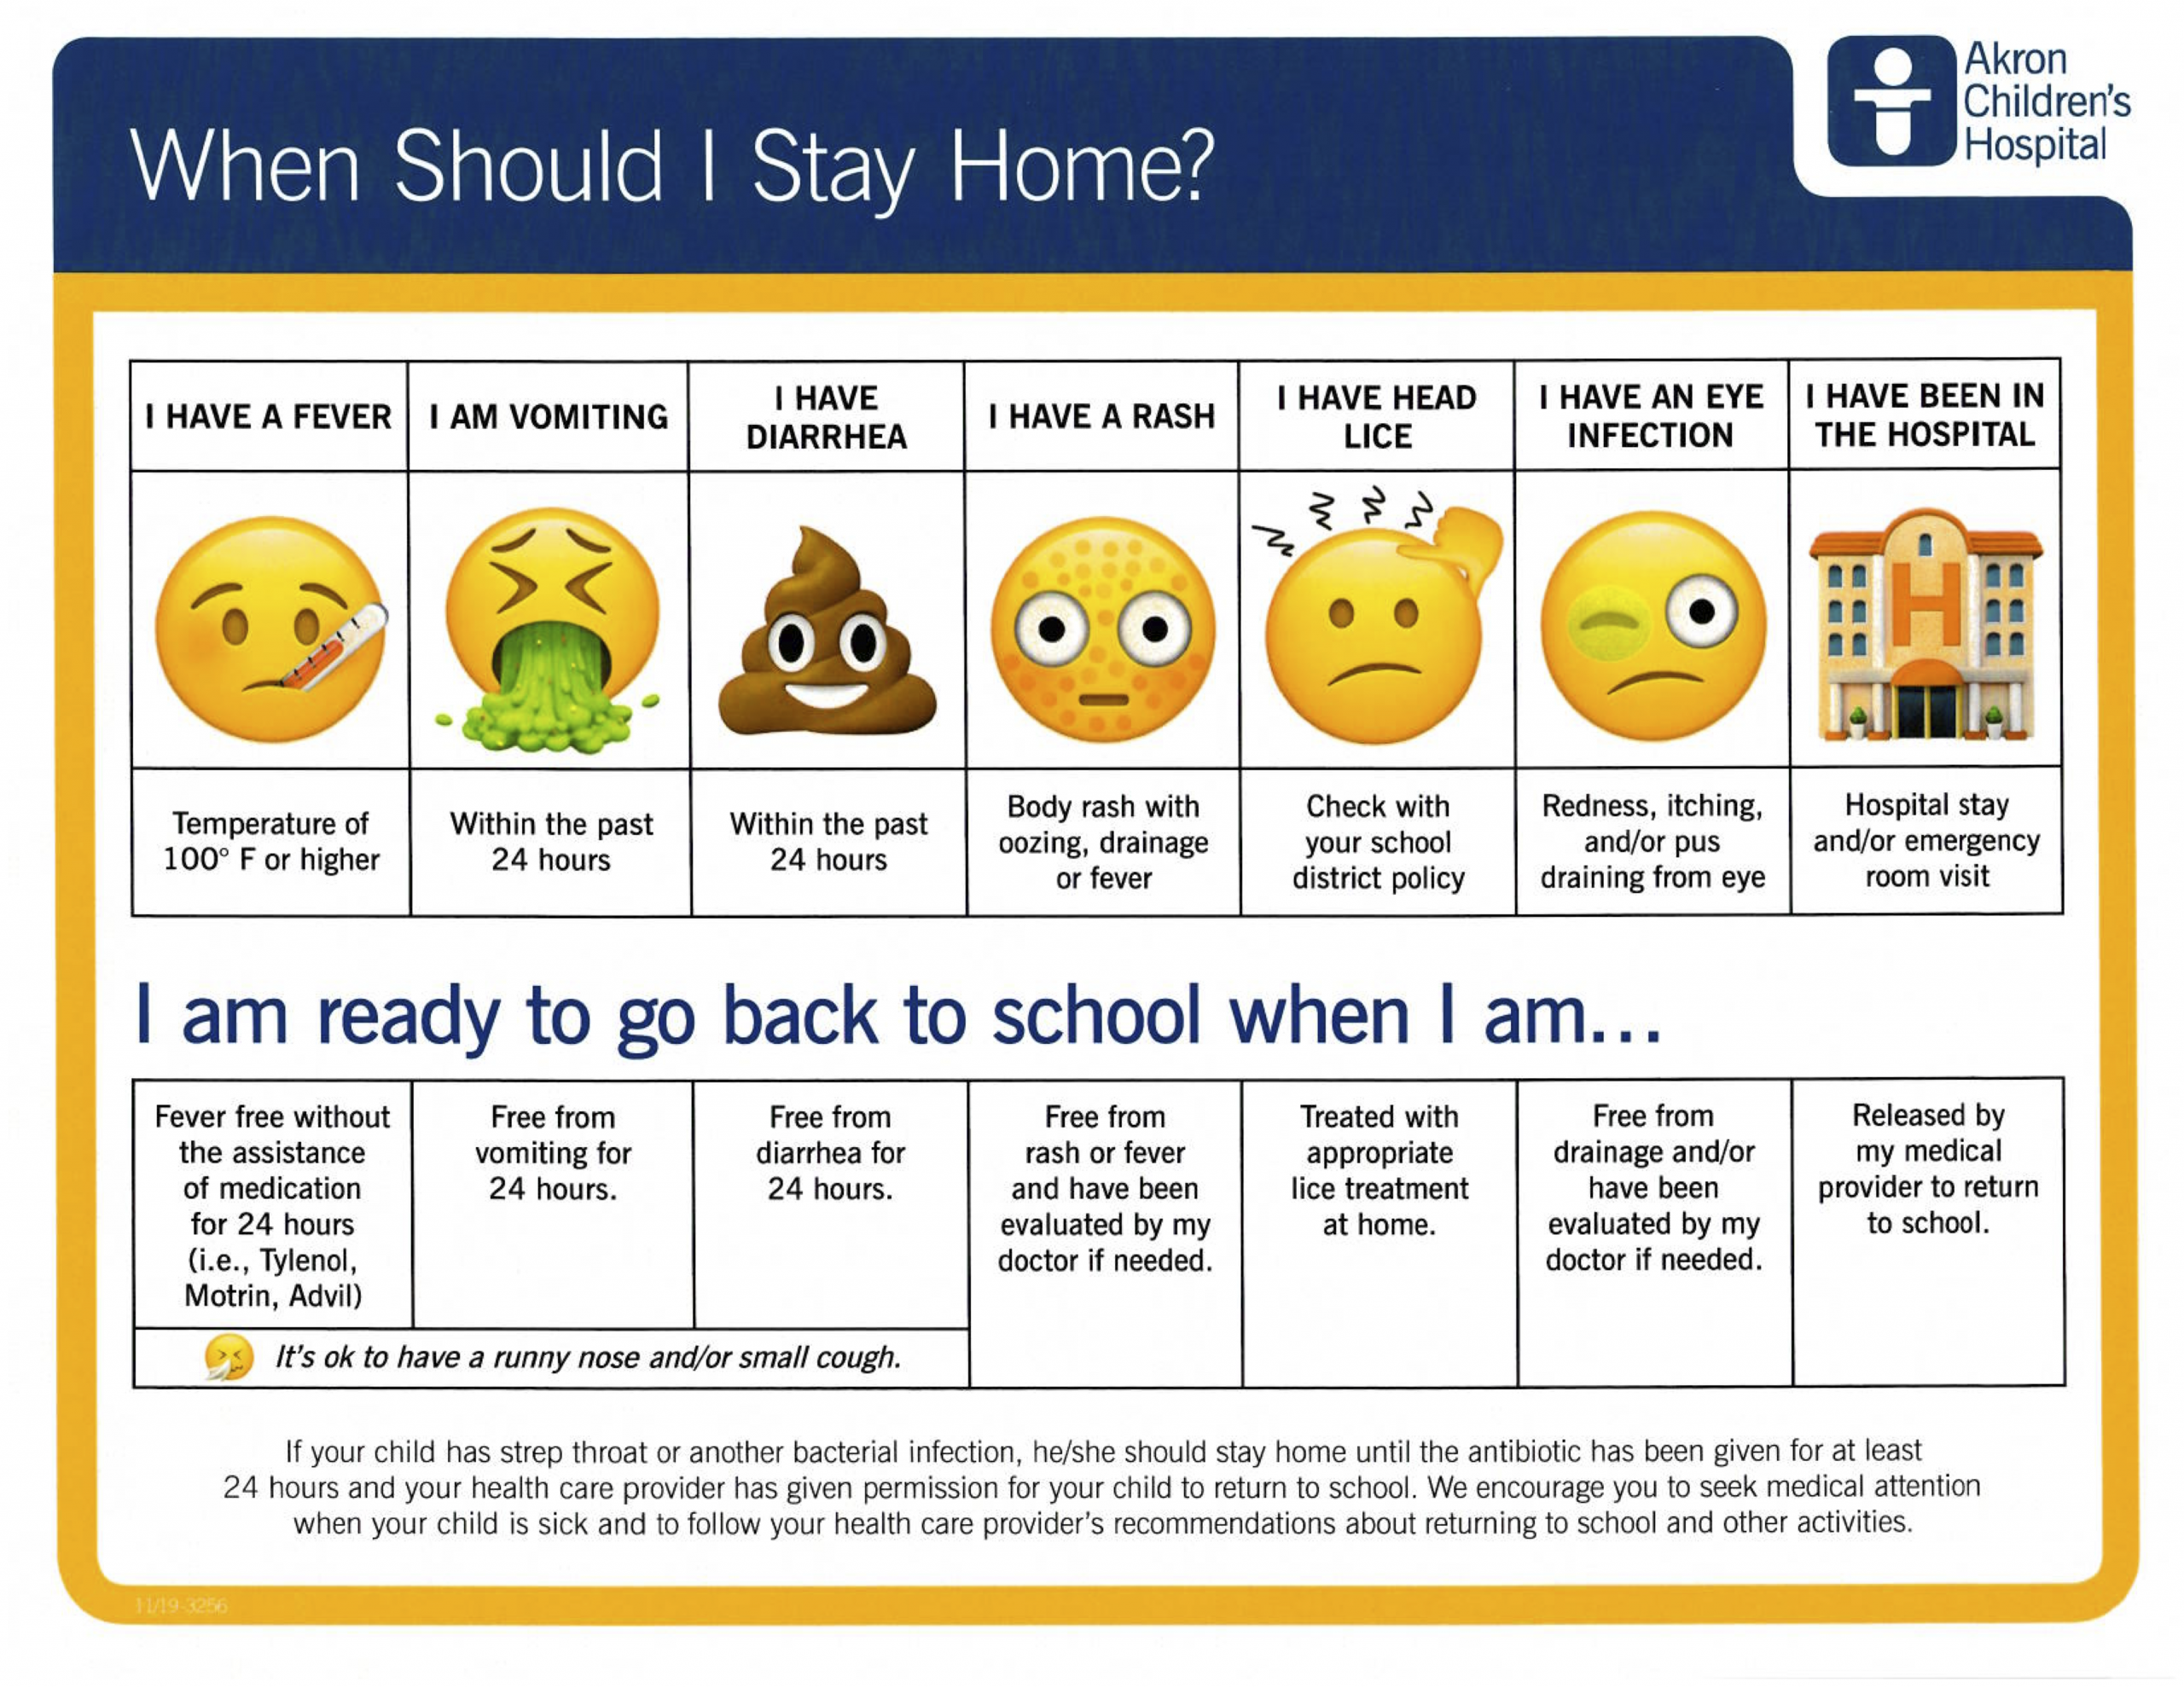 when to stay home image